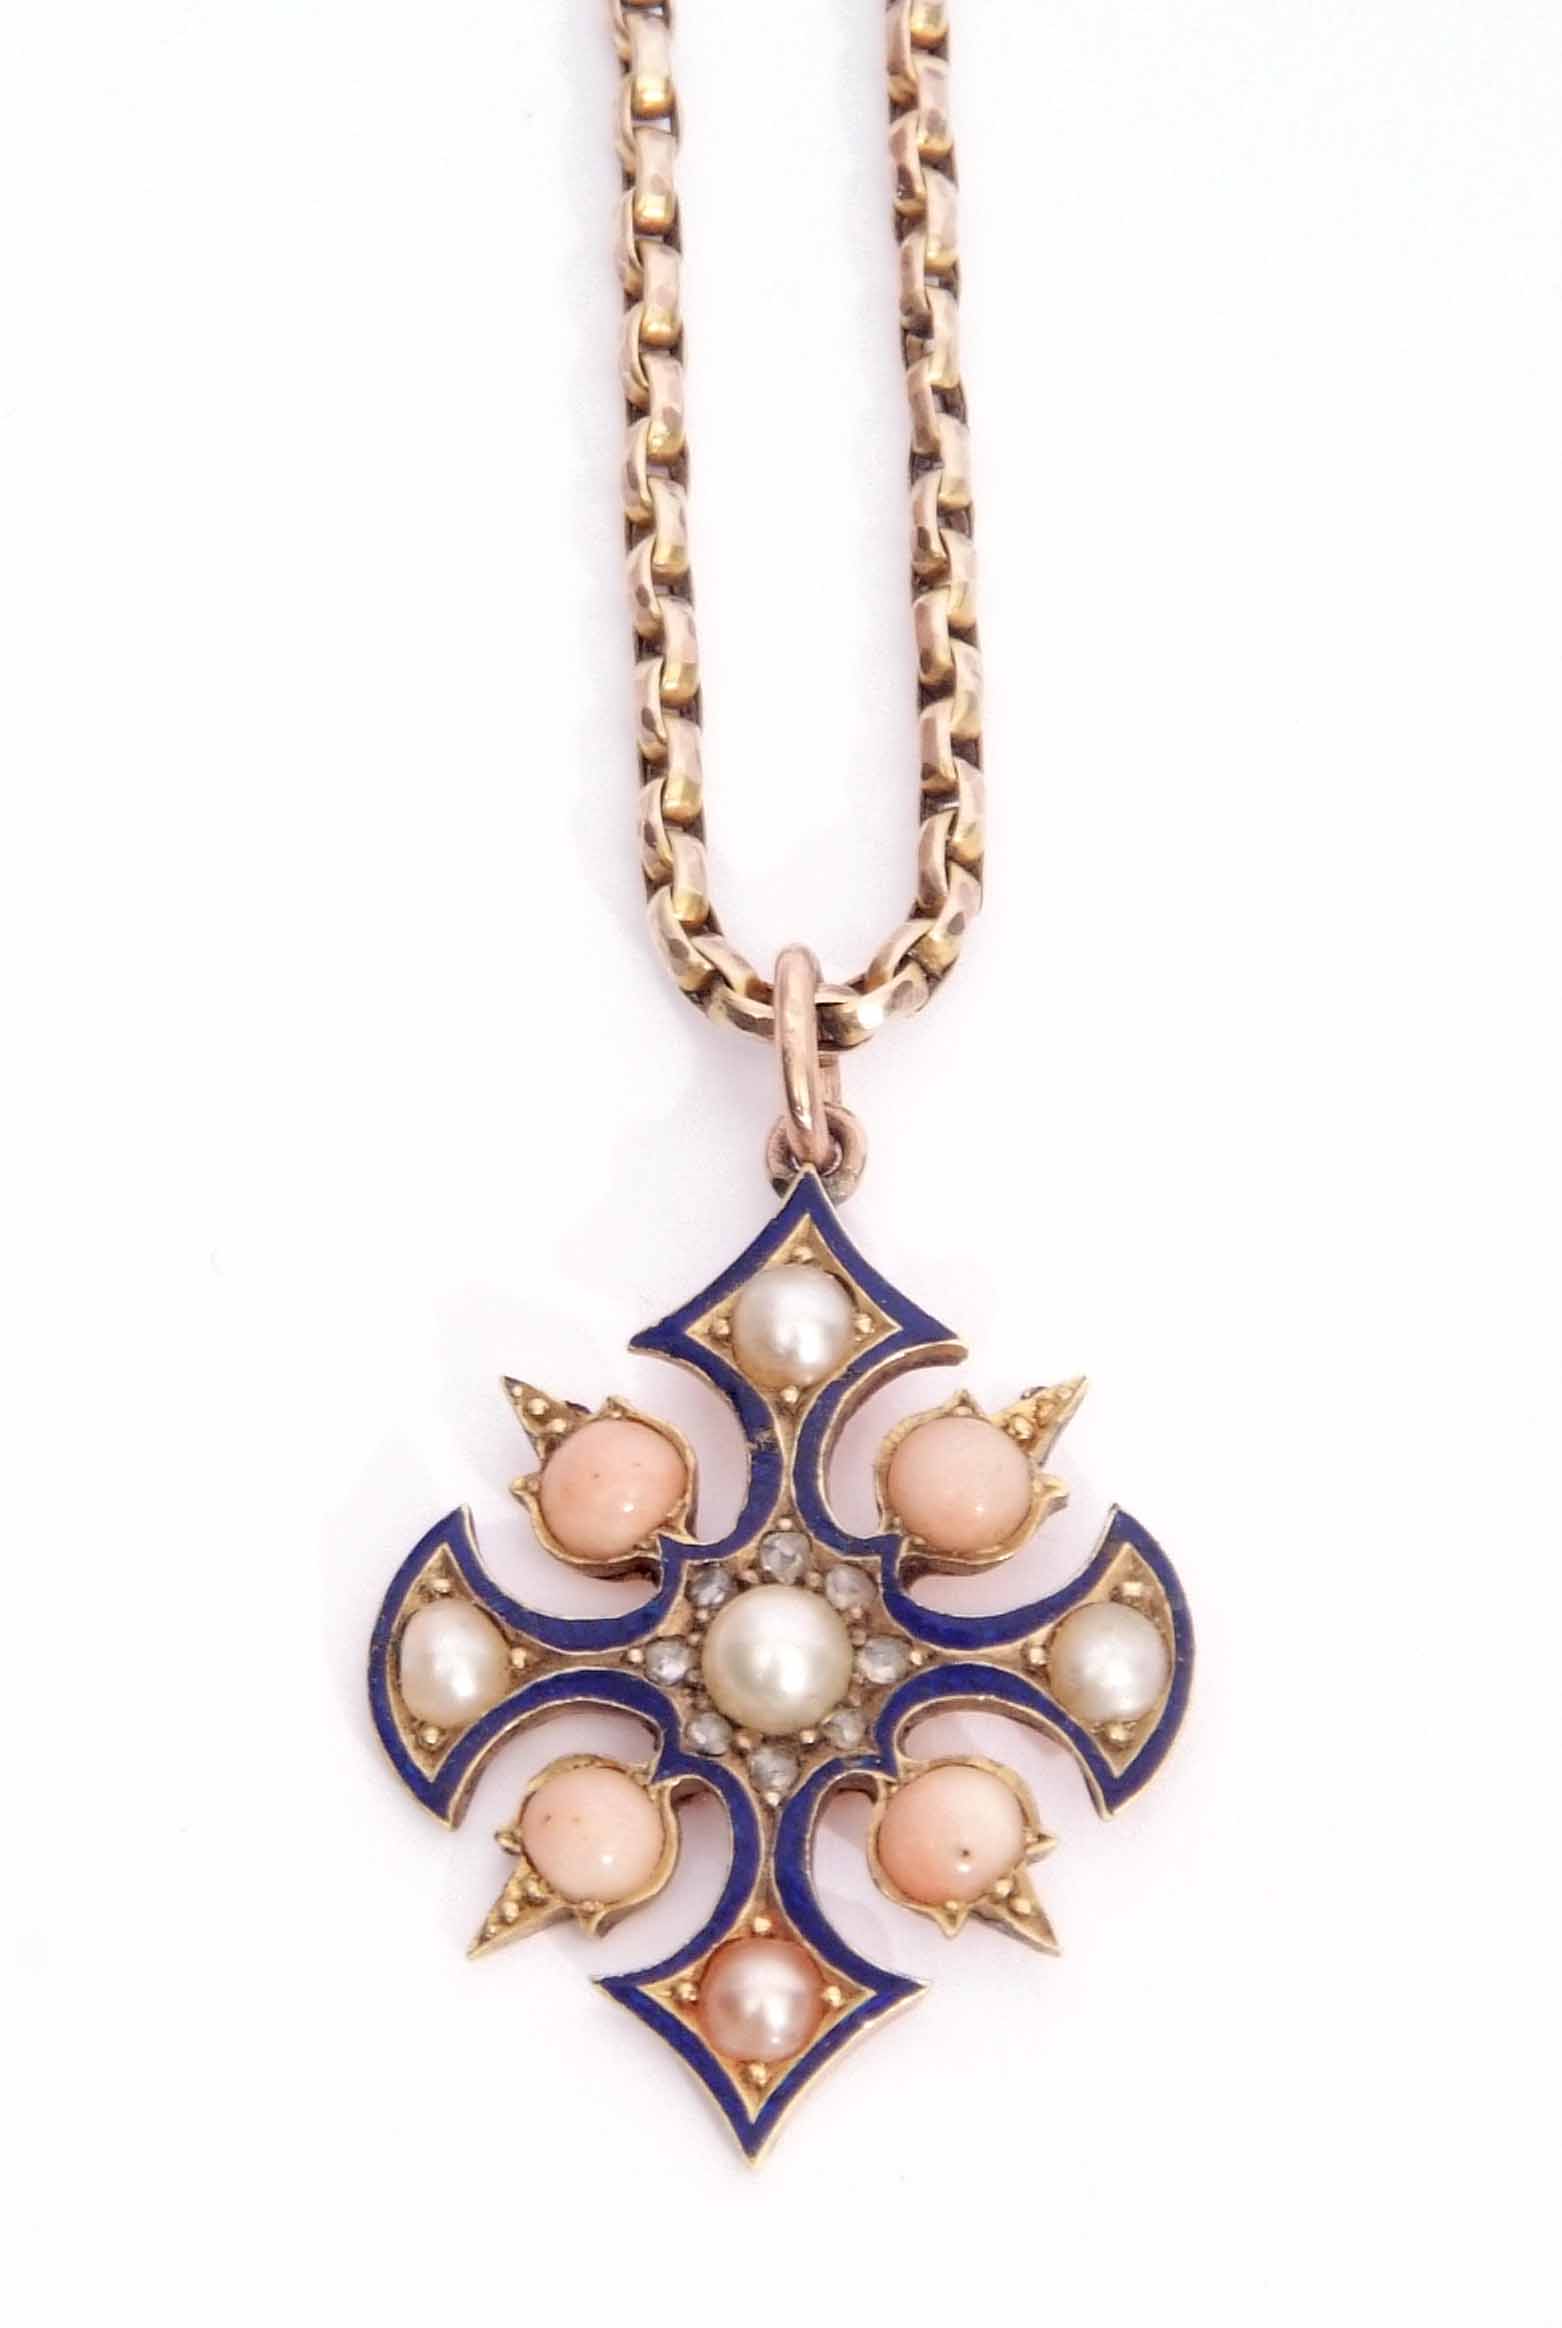 Antique blue enamel, pearl, coral and diamond set cross pendant featuring a central pearl surrounded - Image 4 of 7